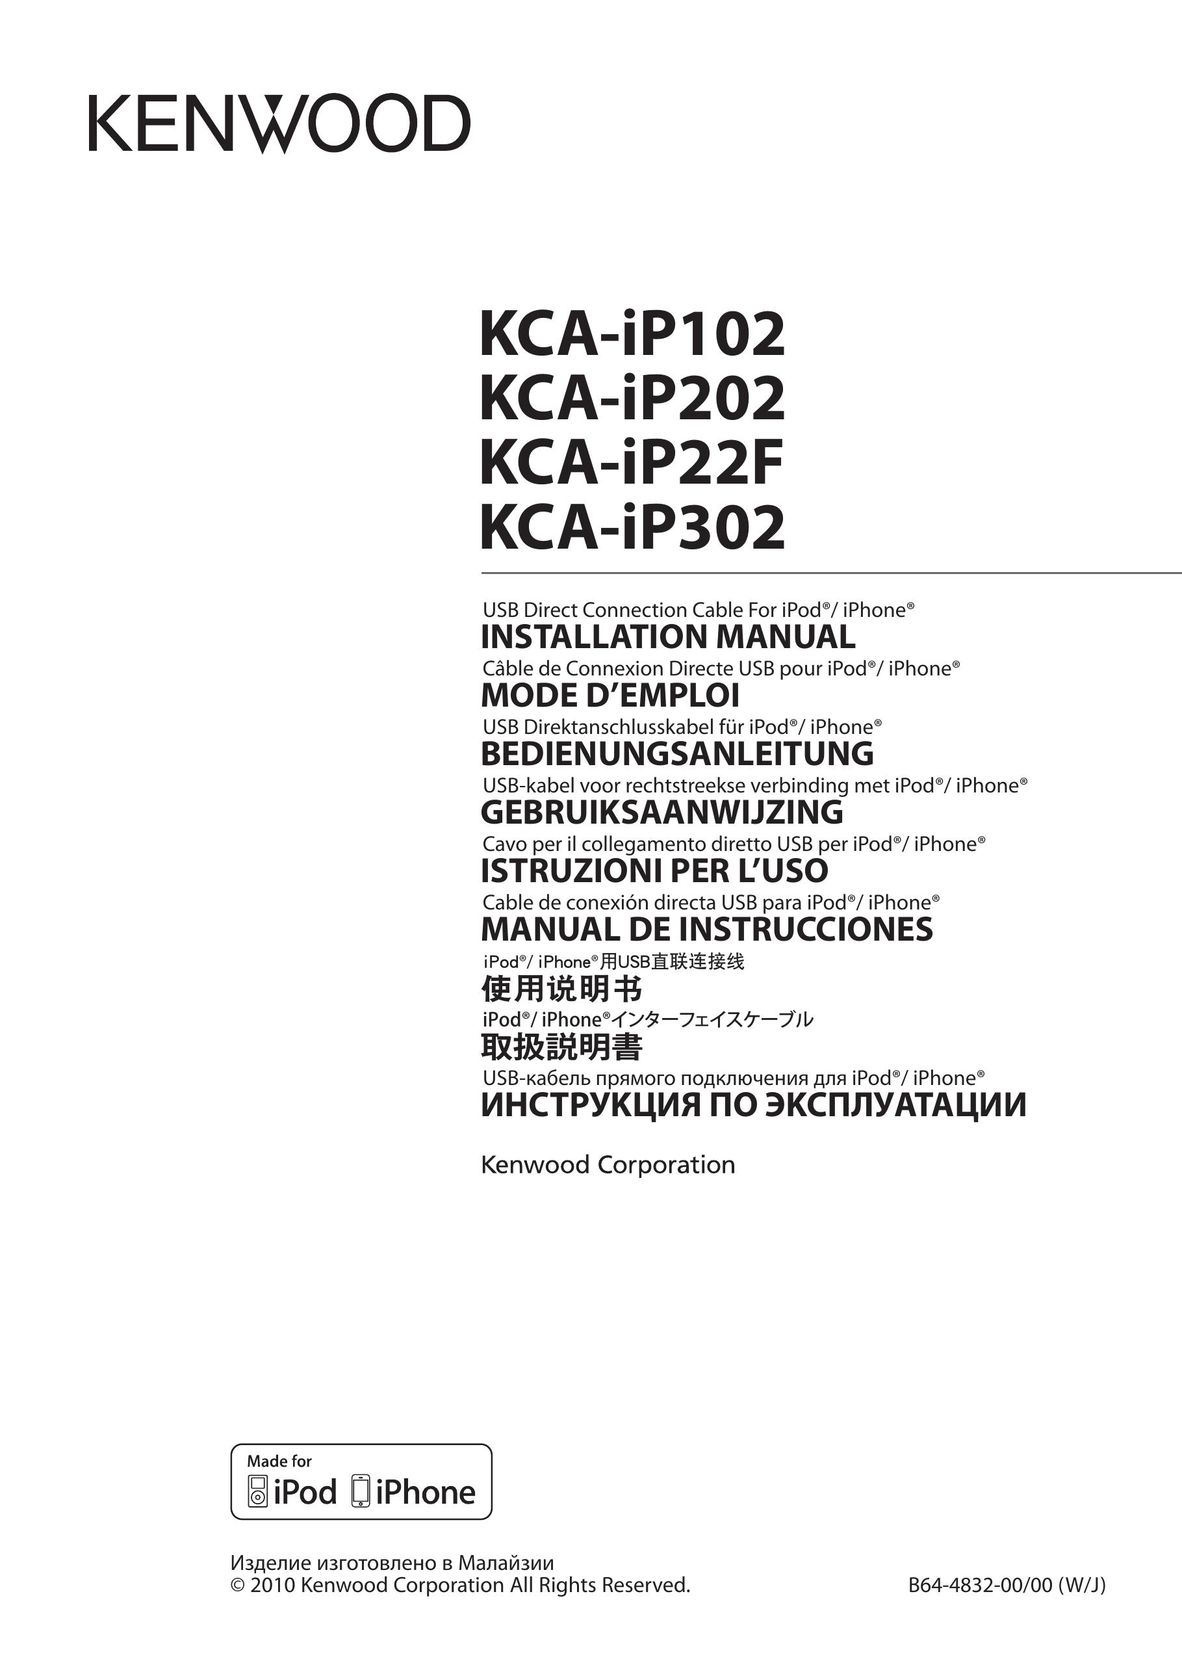 Kenwood KCA-iP302 Network Cables User Manual